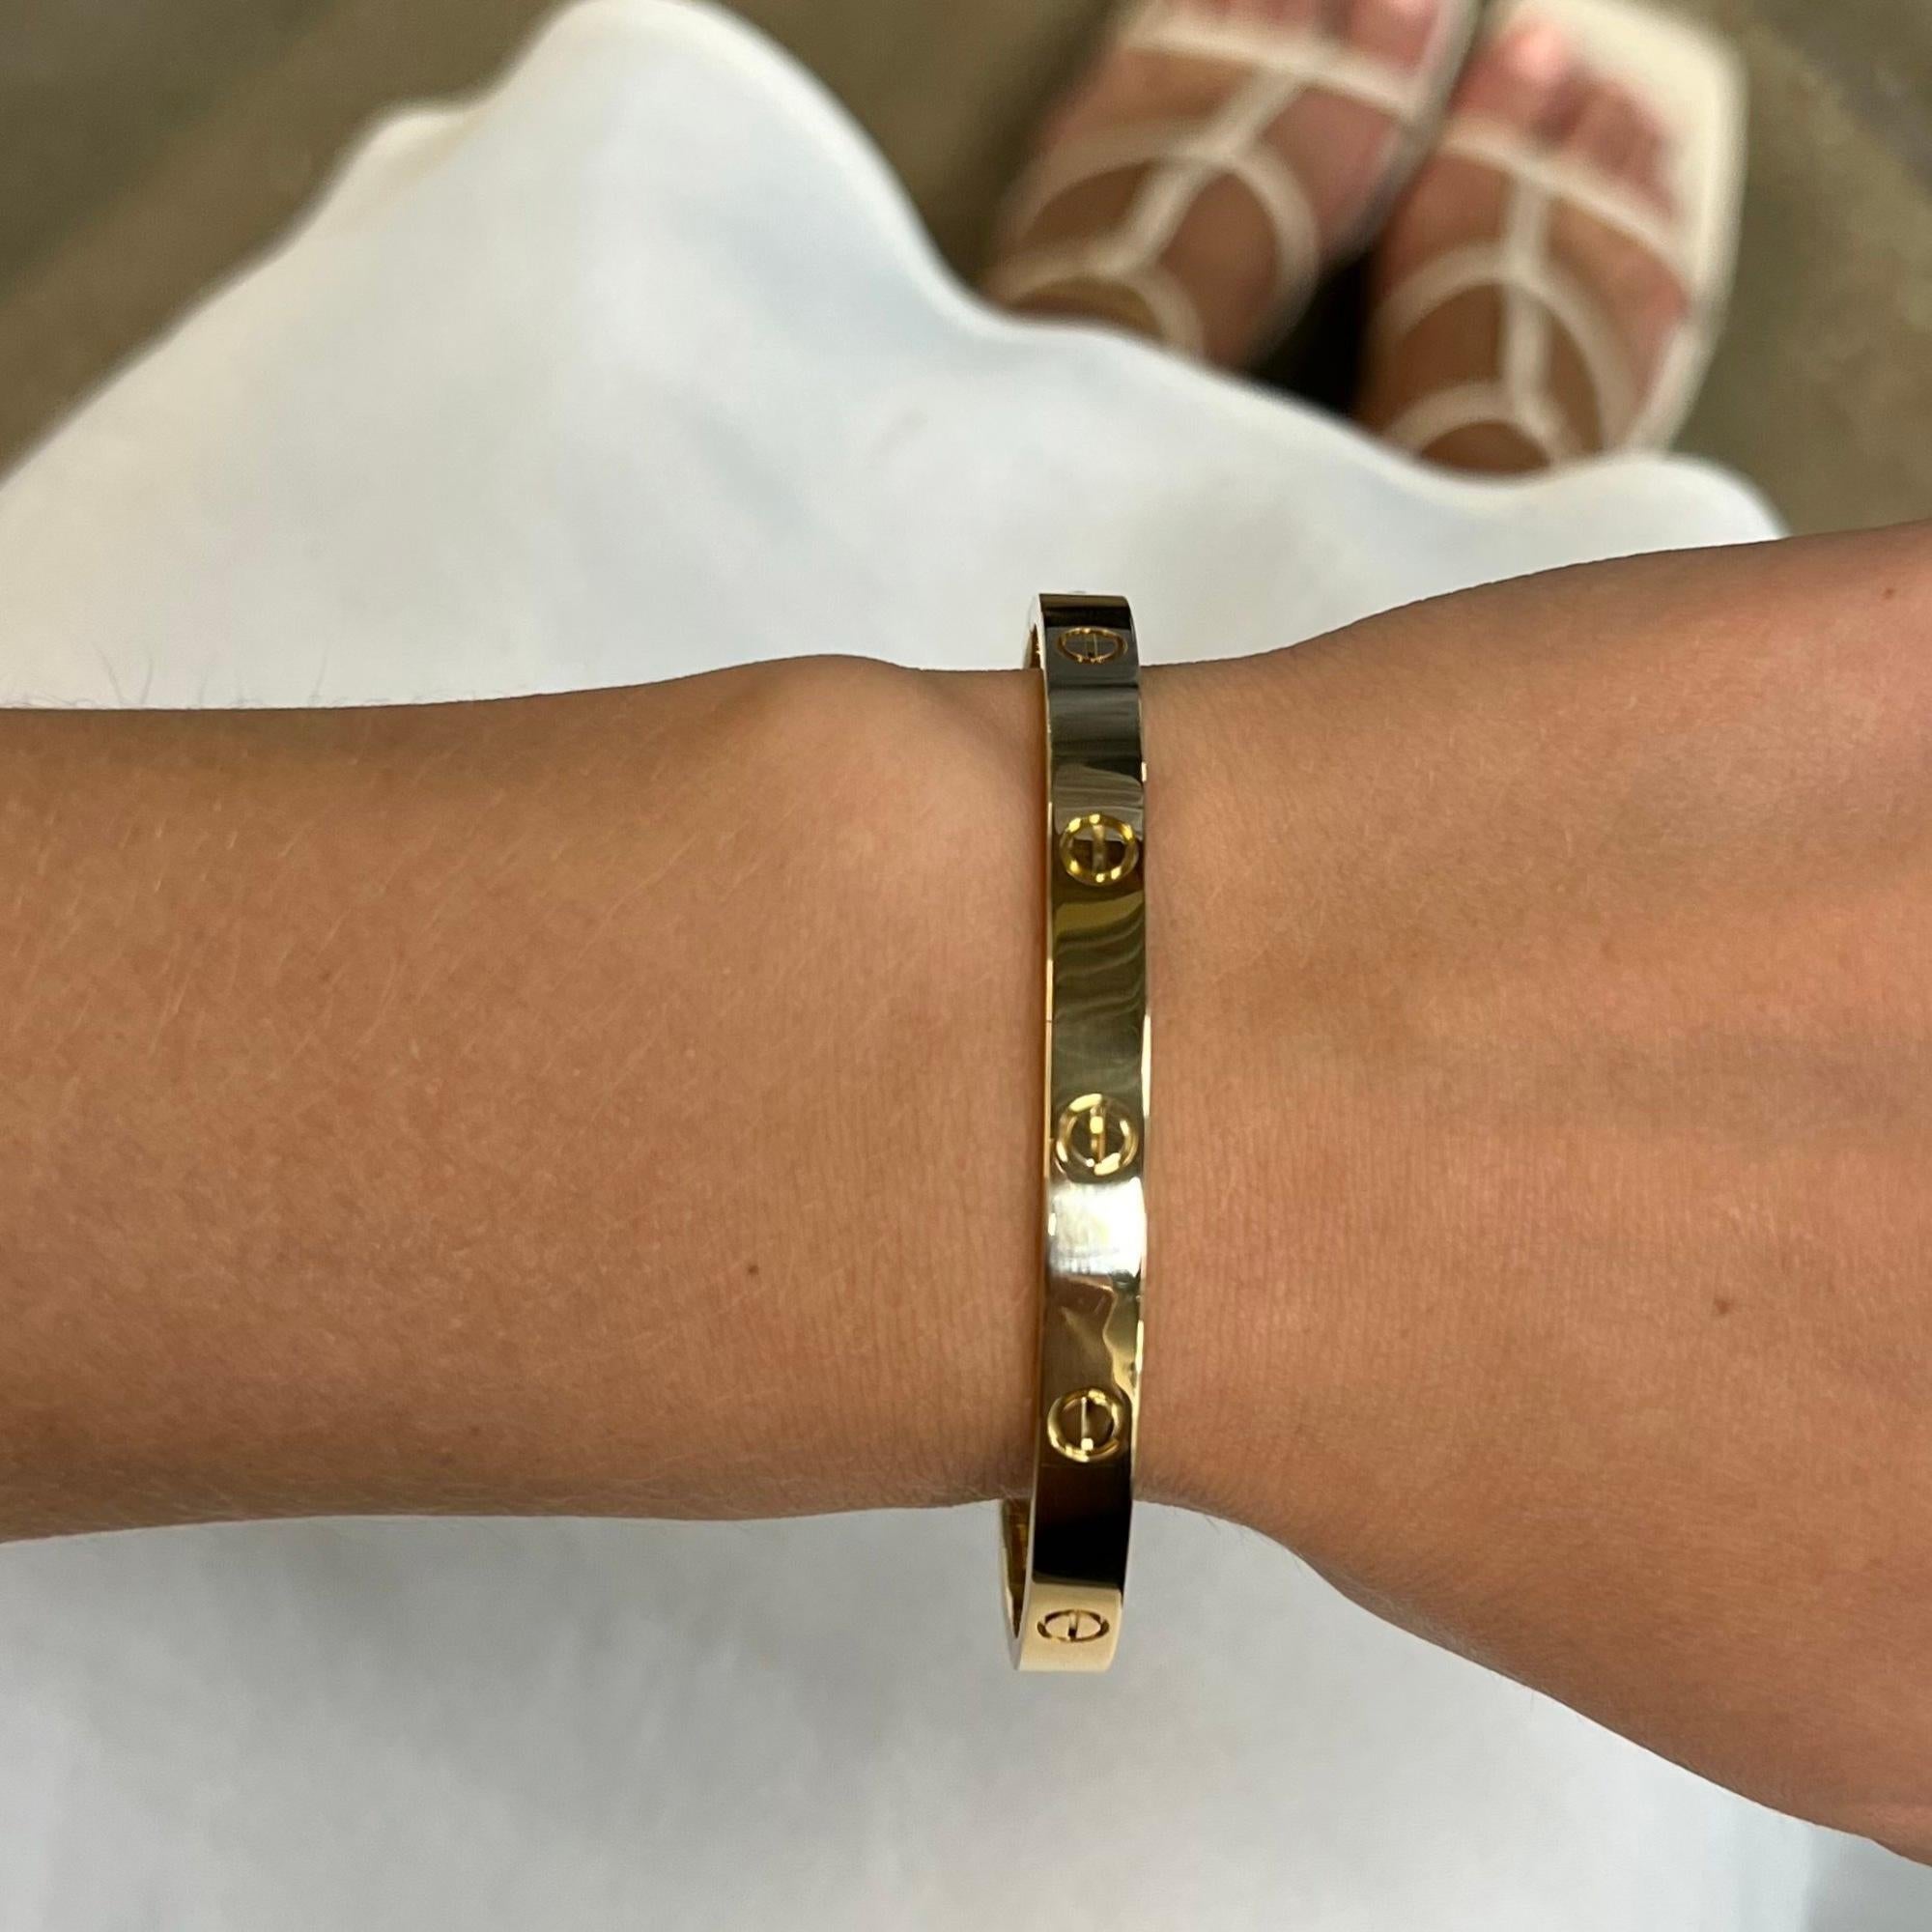 Cartier classic 18K yellow gold Love bangle bracelet size 20. Width: 6.1mm. New style screw system. Excellent pre owned condition. Looks unworn. Come with a screwdriver. No original box included. Comes with a presentable gift box. 